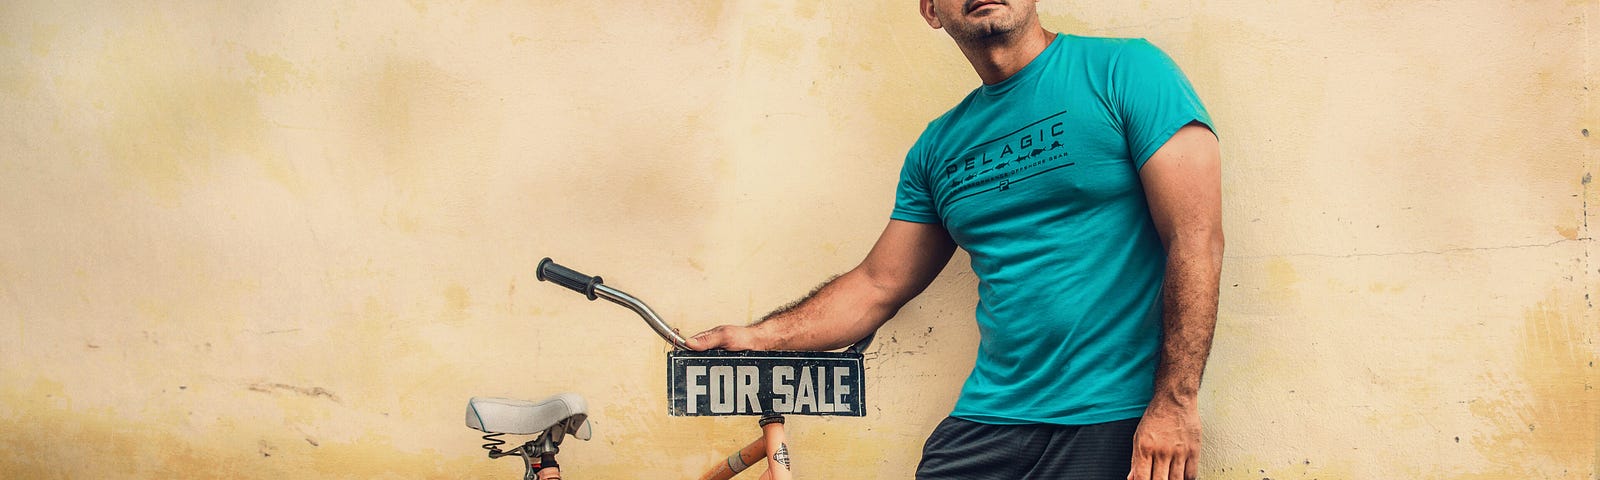 A man trying to sell a woman’s bicycle with “for sale” sign